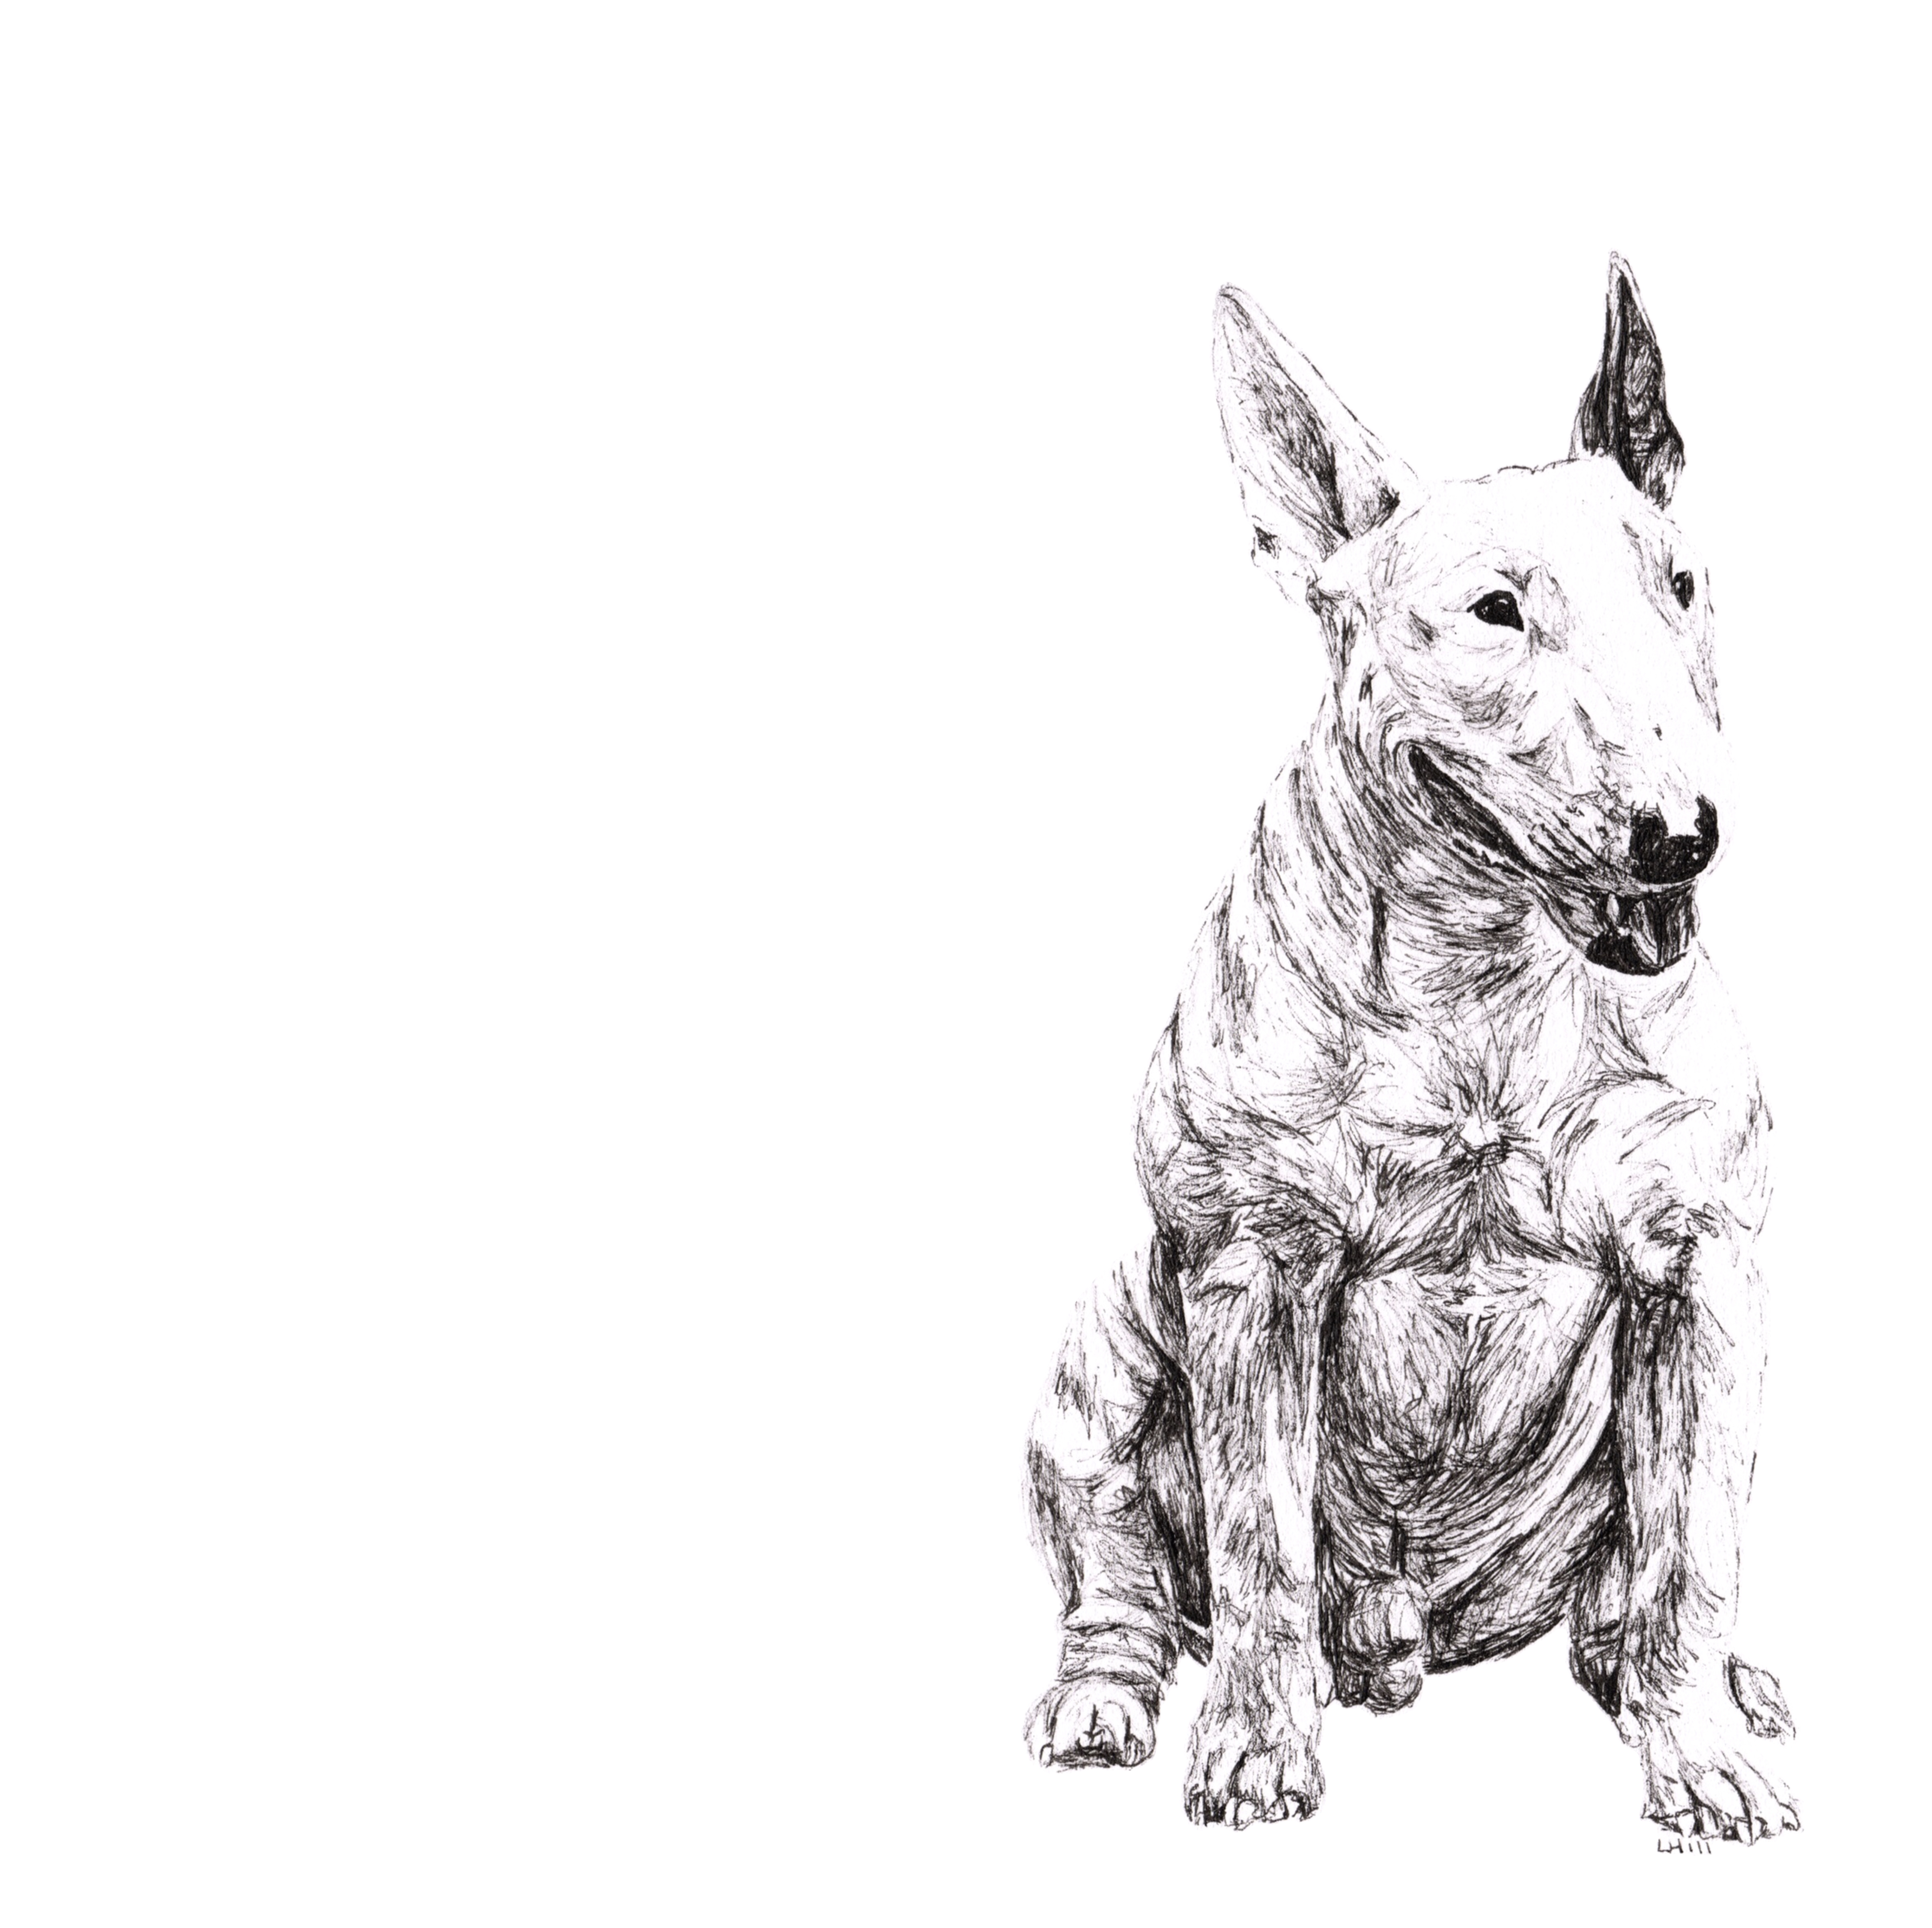 English Bull Terrier pen and ink illustration by Louisa Hill